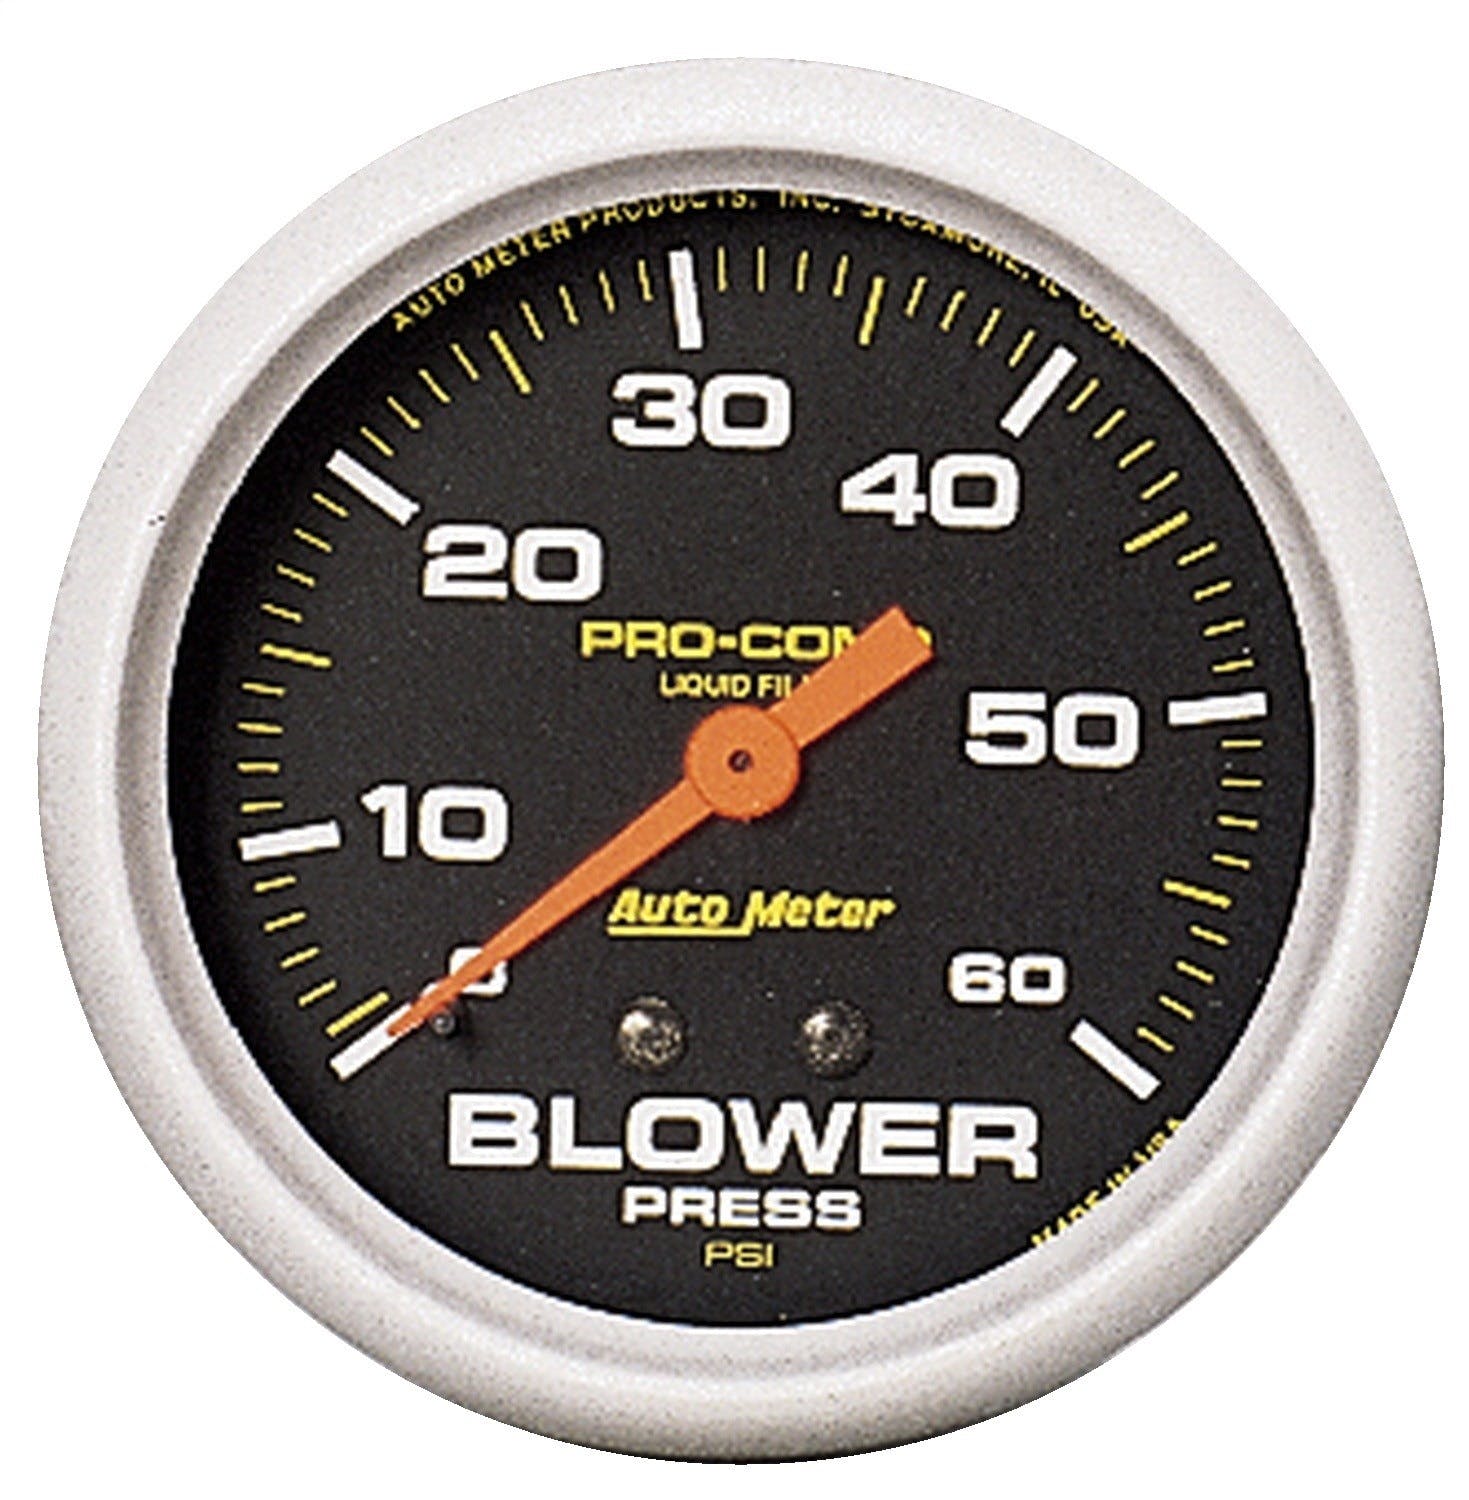 AutoMeter Products 5402 Blower Press 0-60 PSI